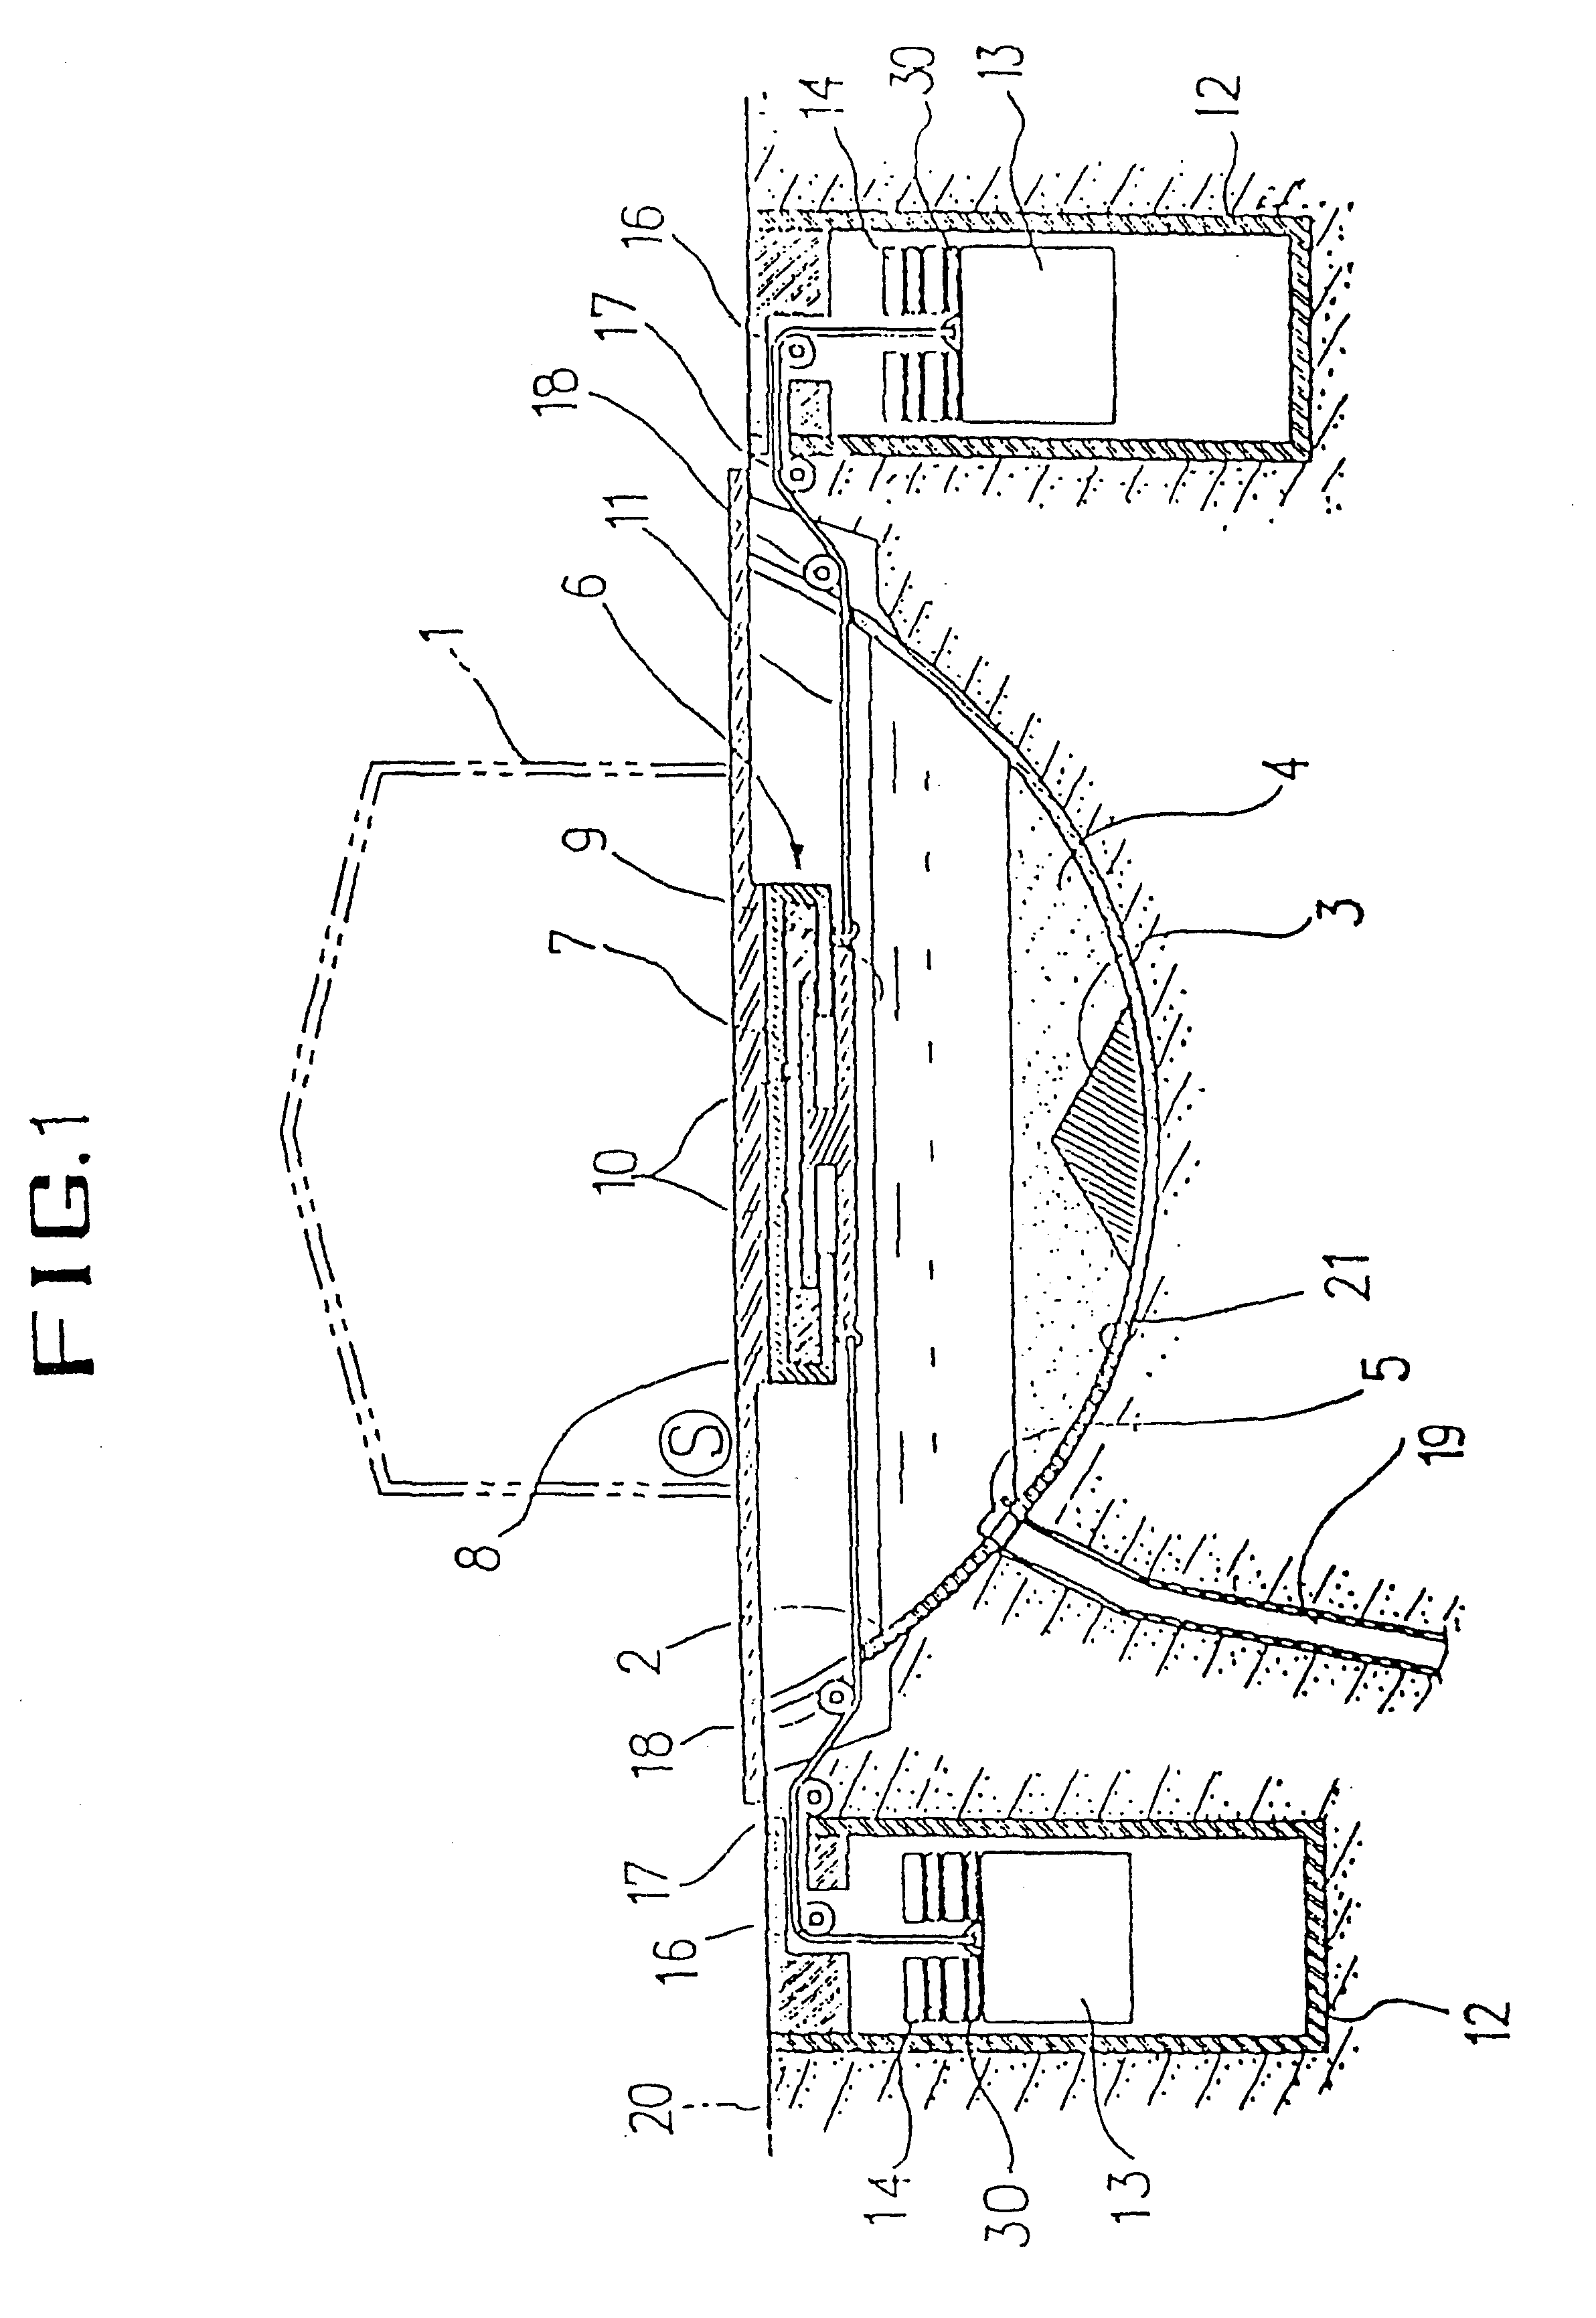 Method of and apparatus for preventing structure from collapsing due to earthquake